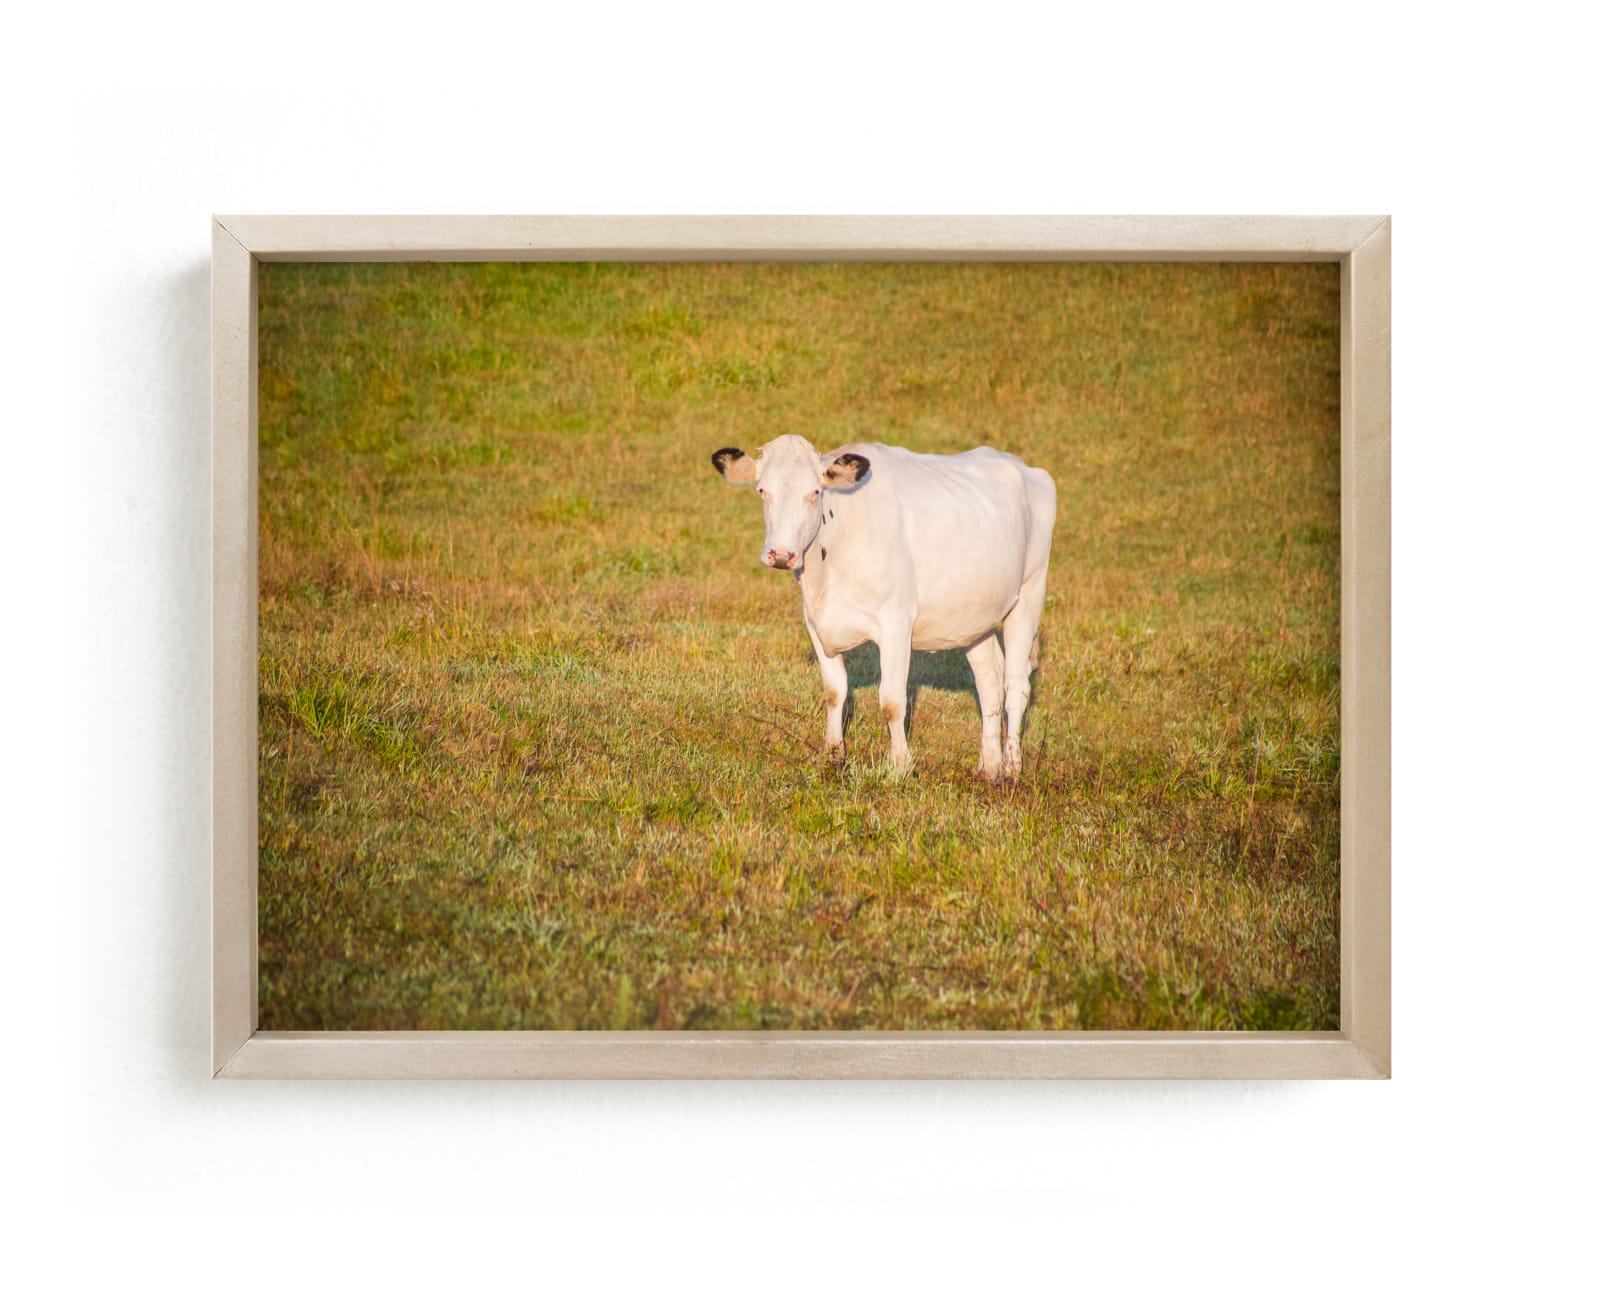 "White cow" by Lying on the grass in beautiful frame options and a variety of sizes.